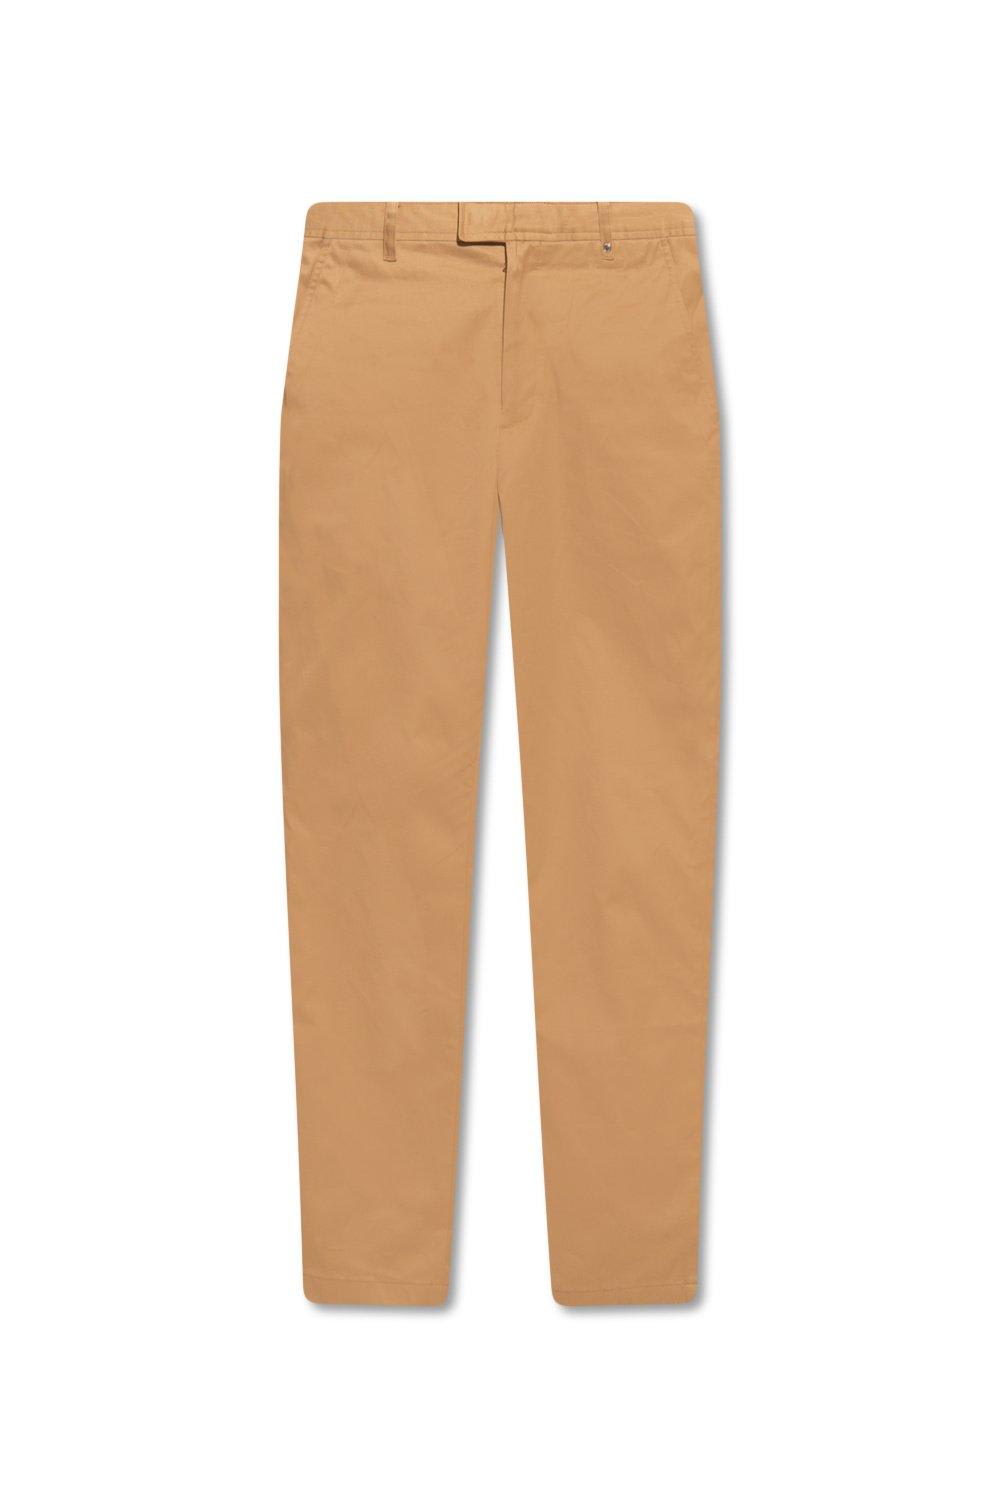 BURBERRY LOGO EMBROIDERED STRAIGHT LEG TROUSERS